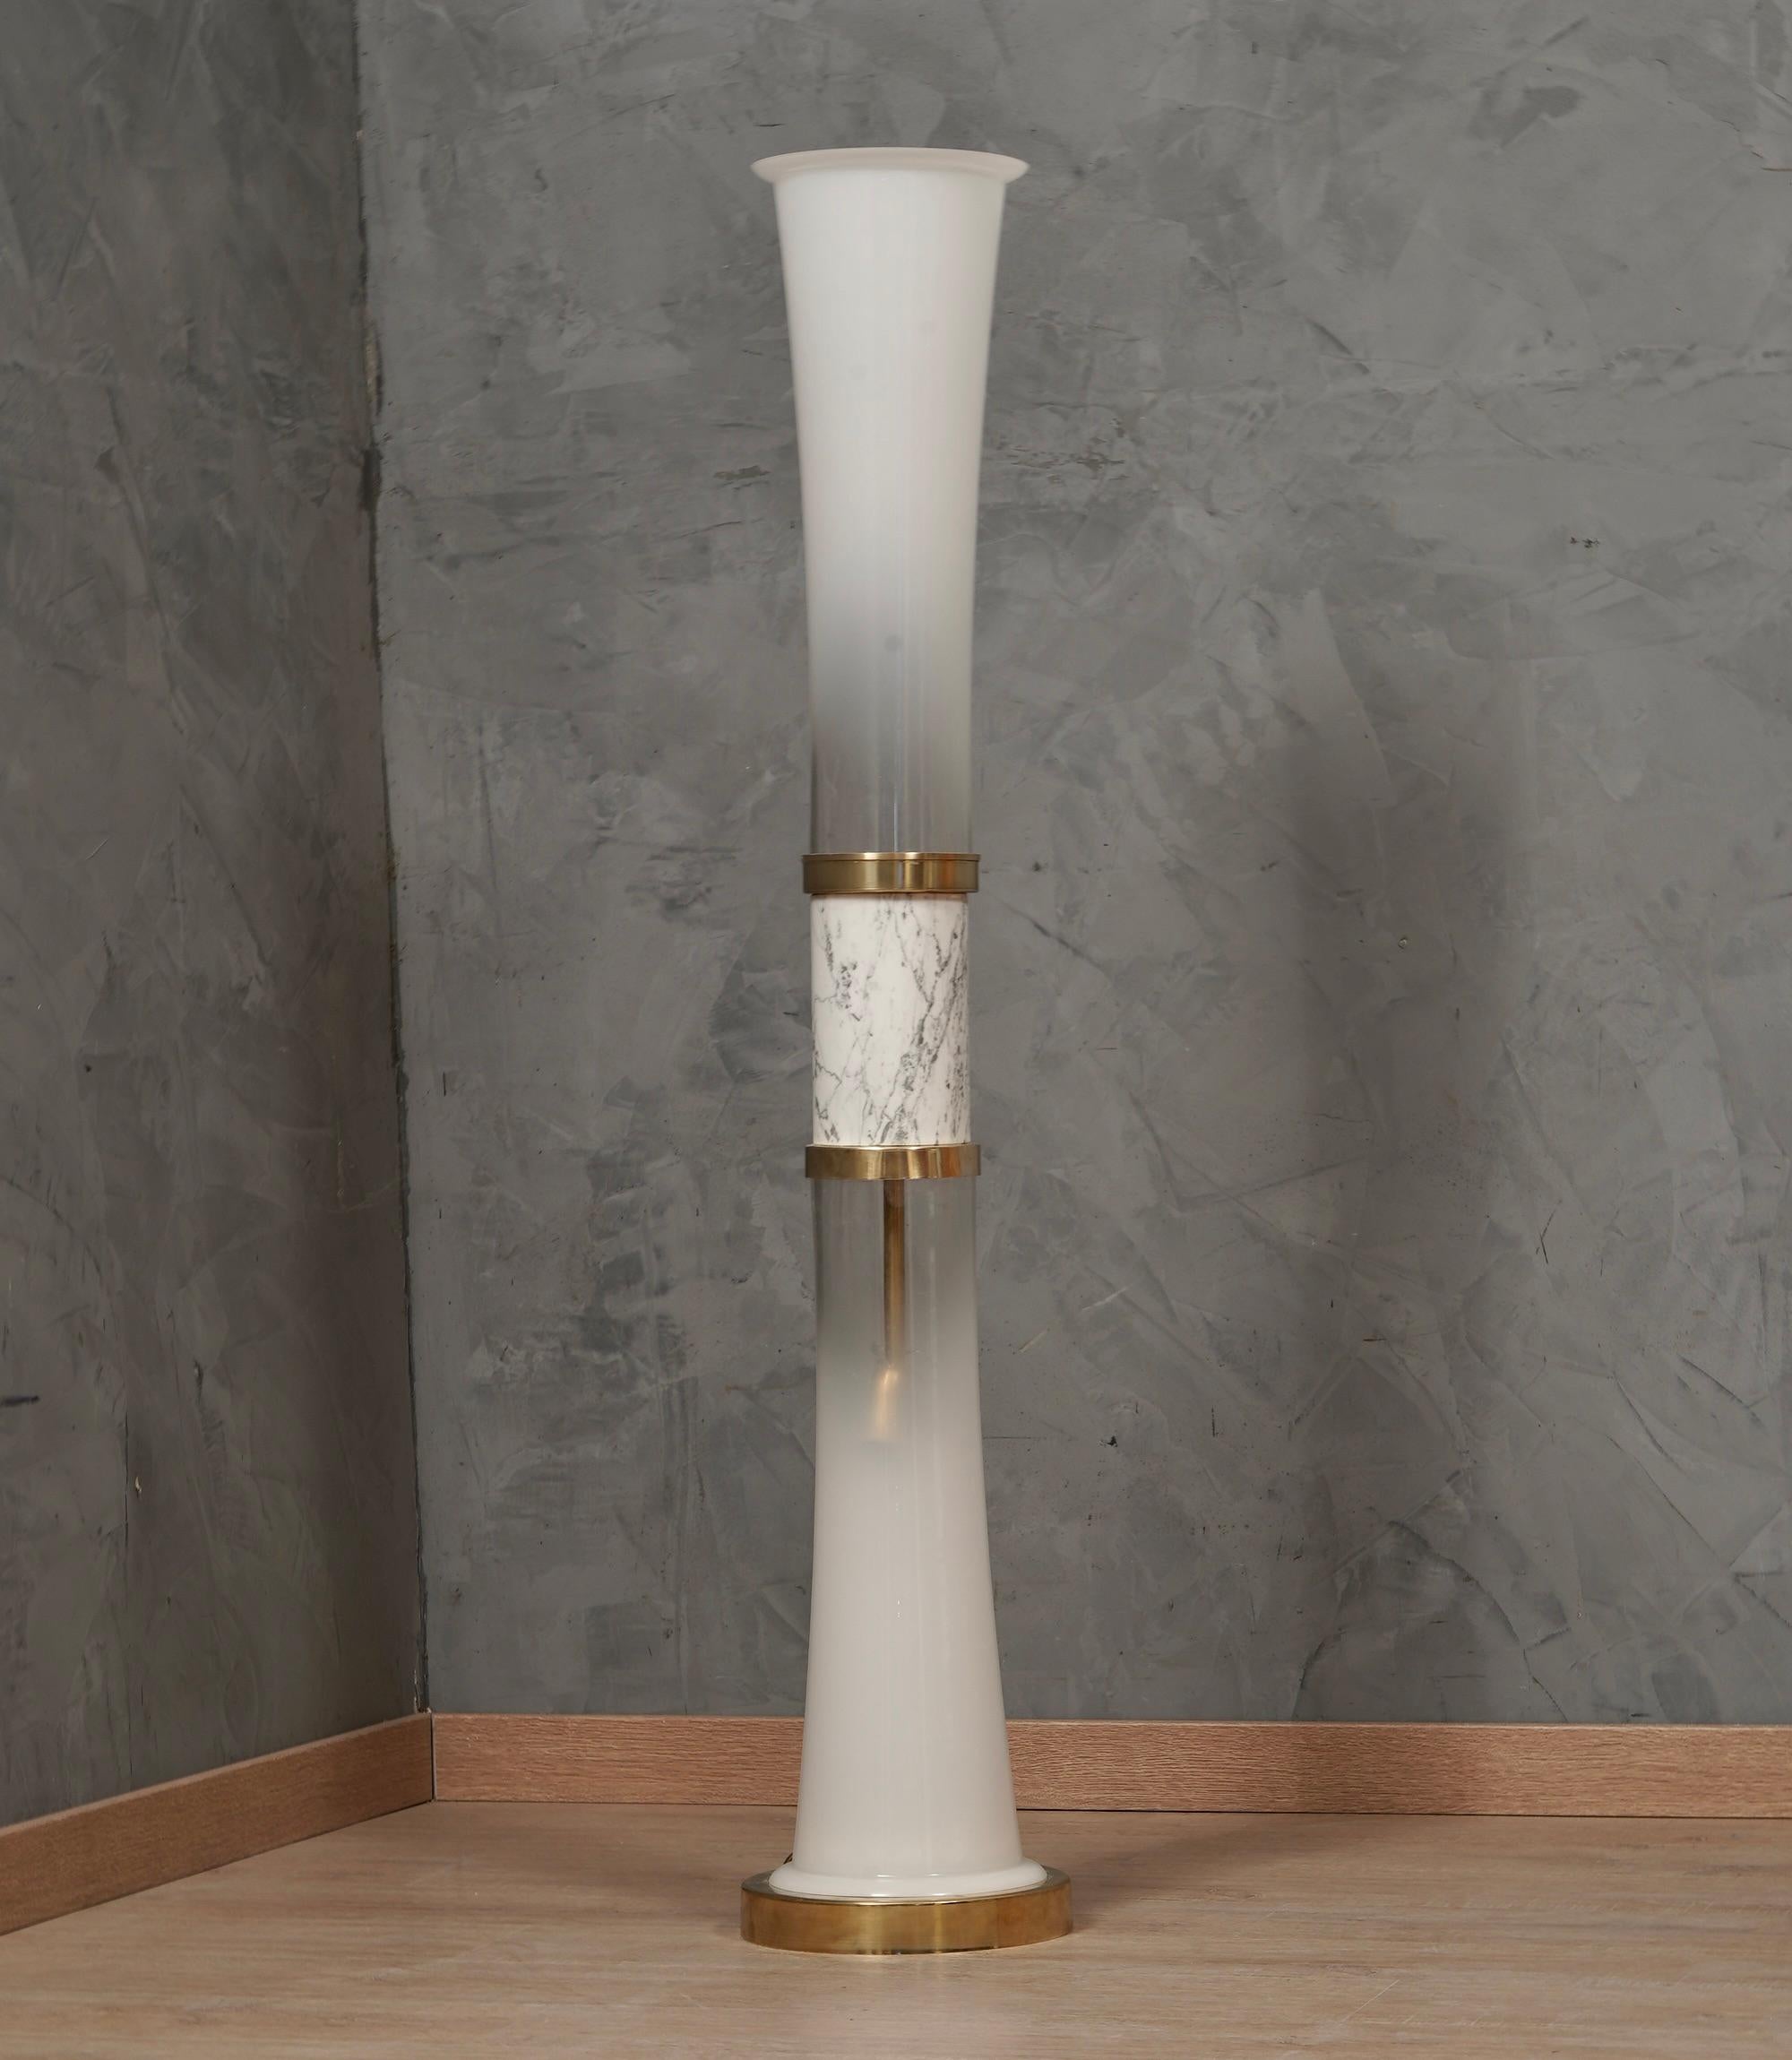 Very original floor lamp in Murano glass, Carrara marble and brass. Use of unusual materials for a one-of-a-kind floor lamp. The brass stands out above all this white marble and glass.

The floor lamp is made up of a series of overlapping pieces.